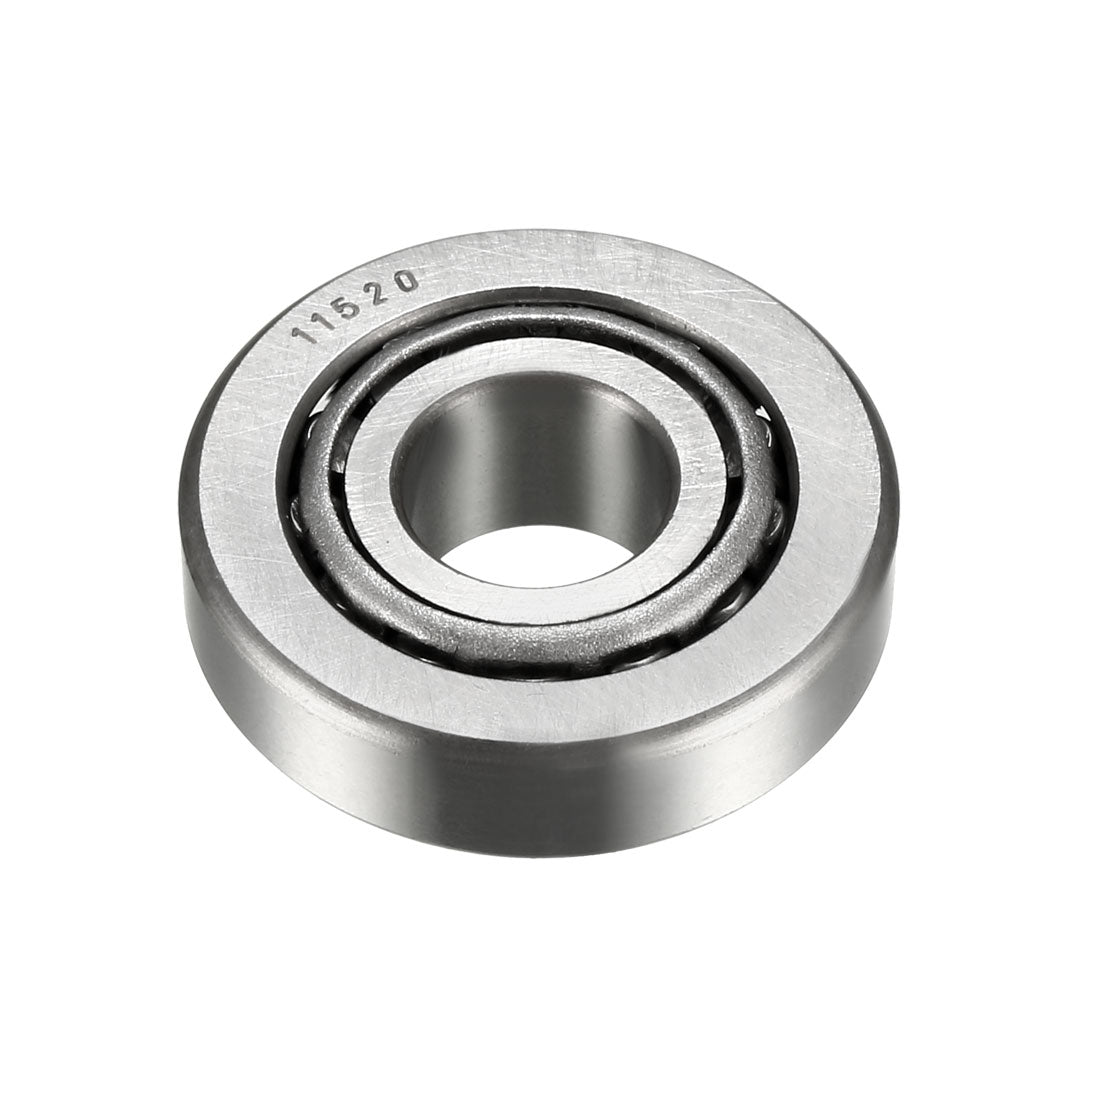 uxcell Uxcell 11590/11520 Tapered Roller Bearing Cone and Cup Set 0.625" Bore 1.688" O.D. 2pcs